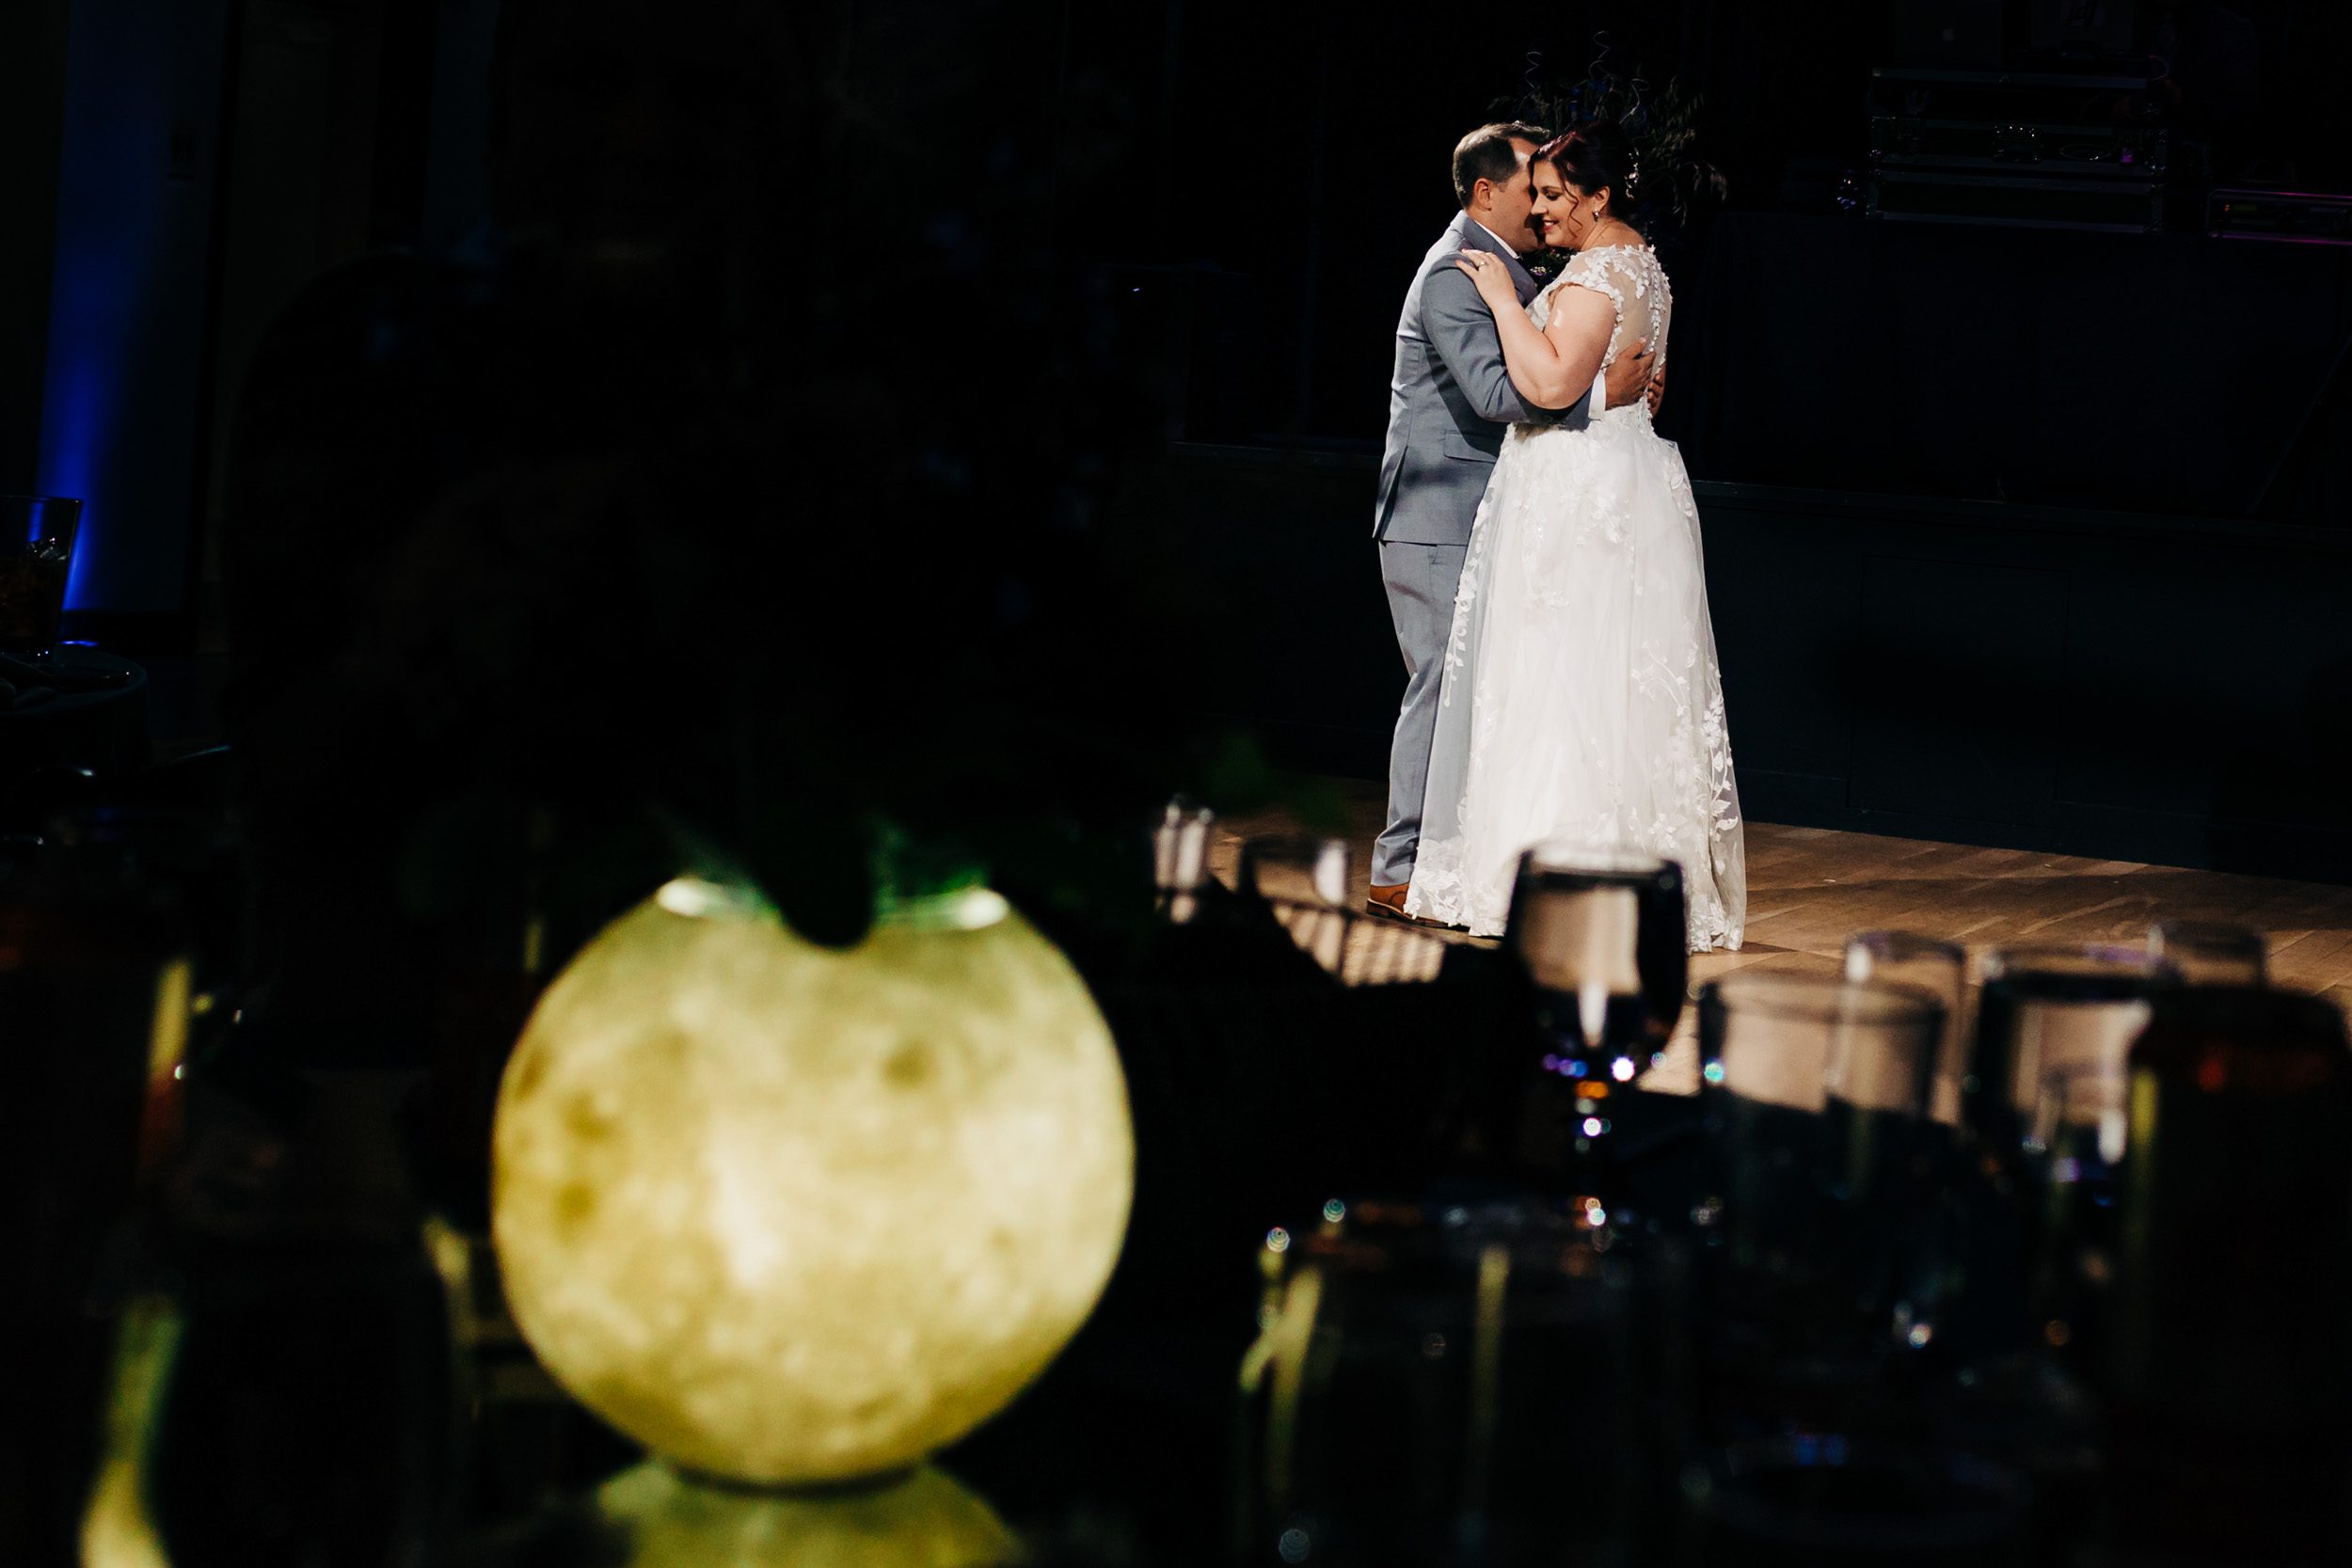 First dance with moon centerpiece